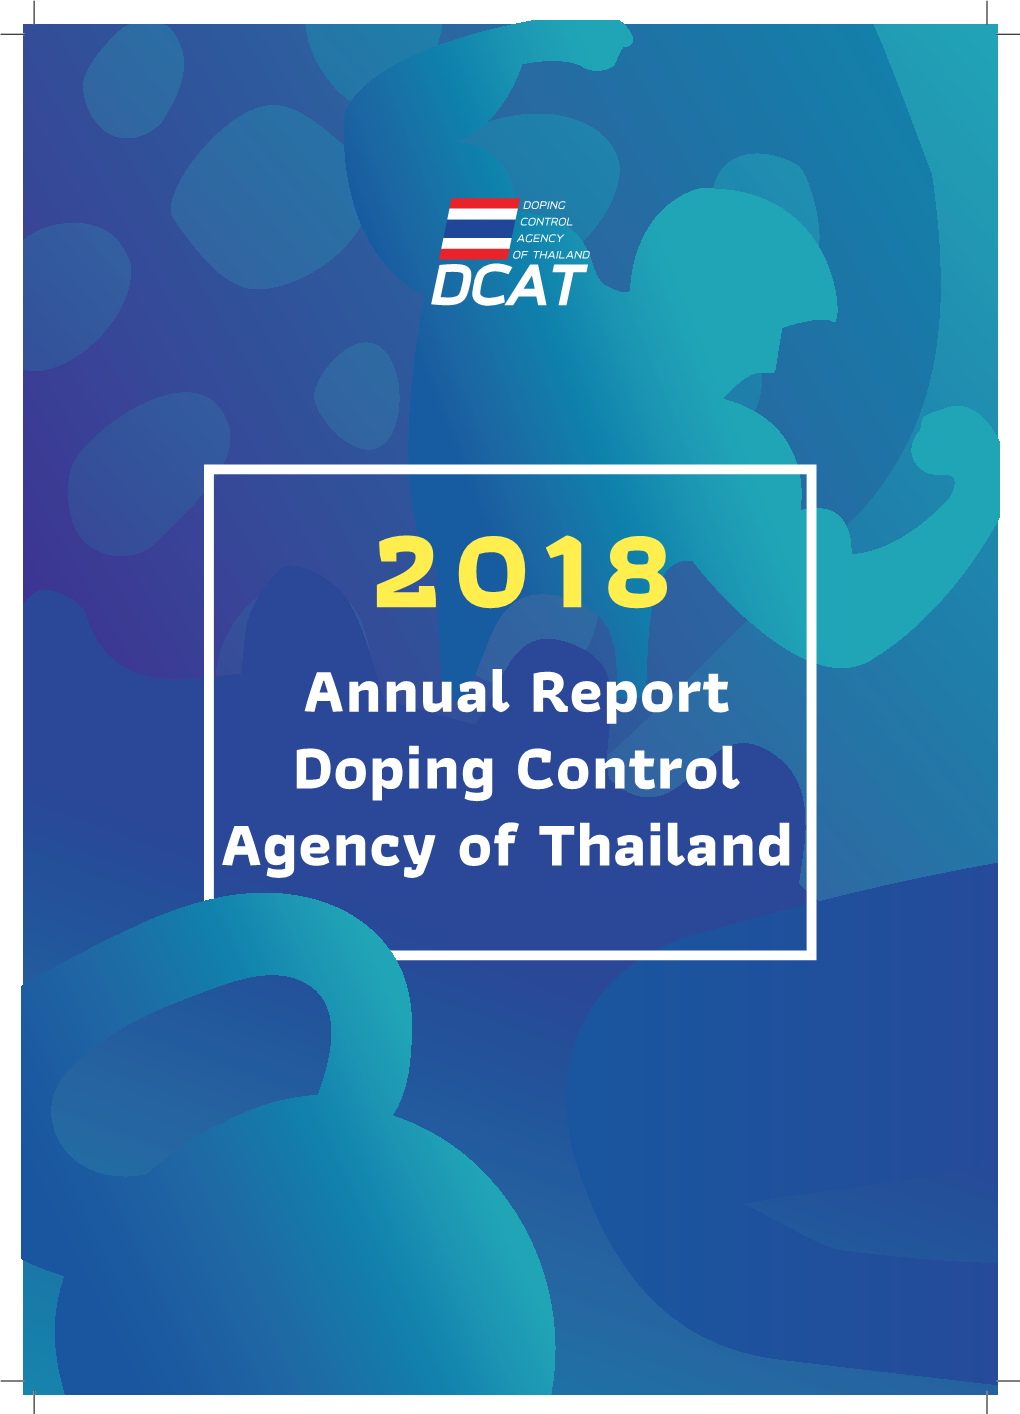 2018 DCAT Annual Report E1.Indd 24102019.Indd